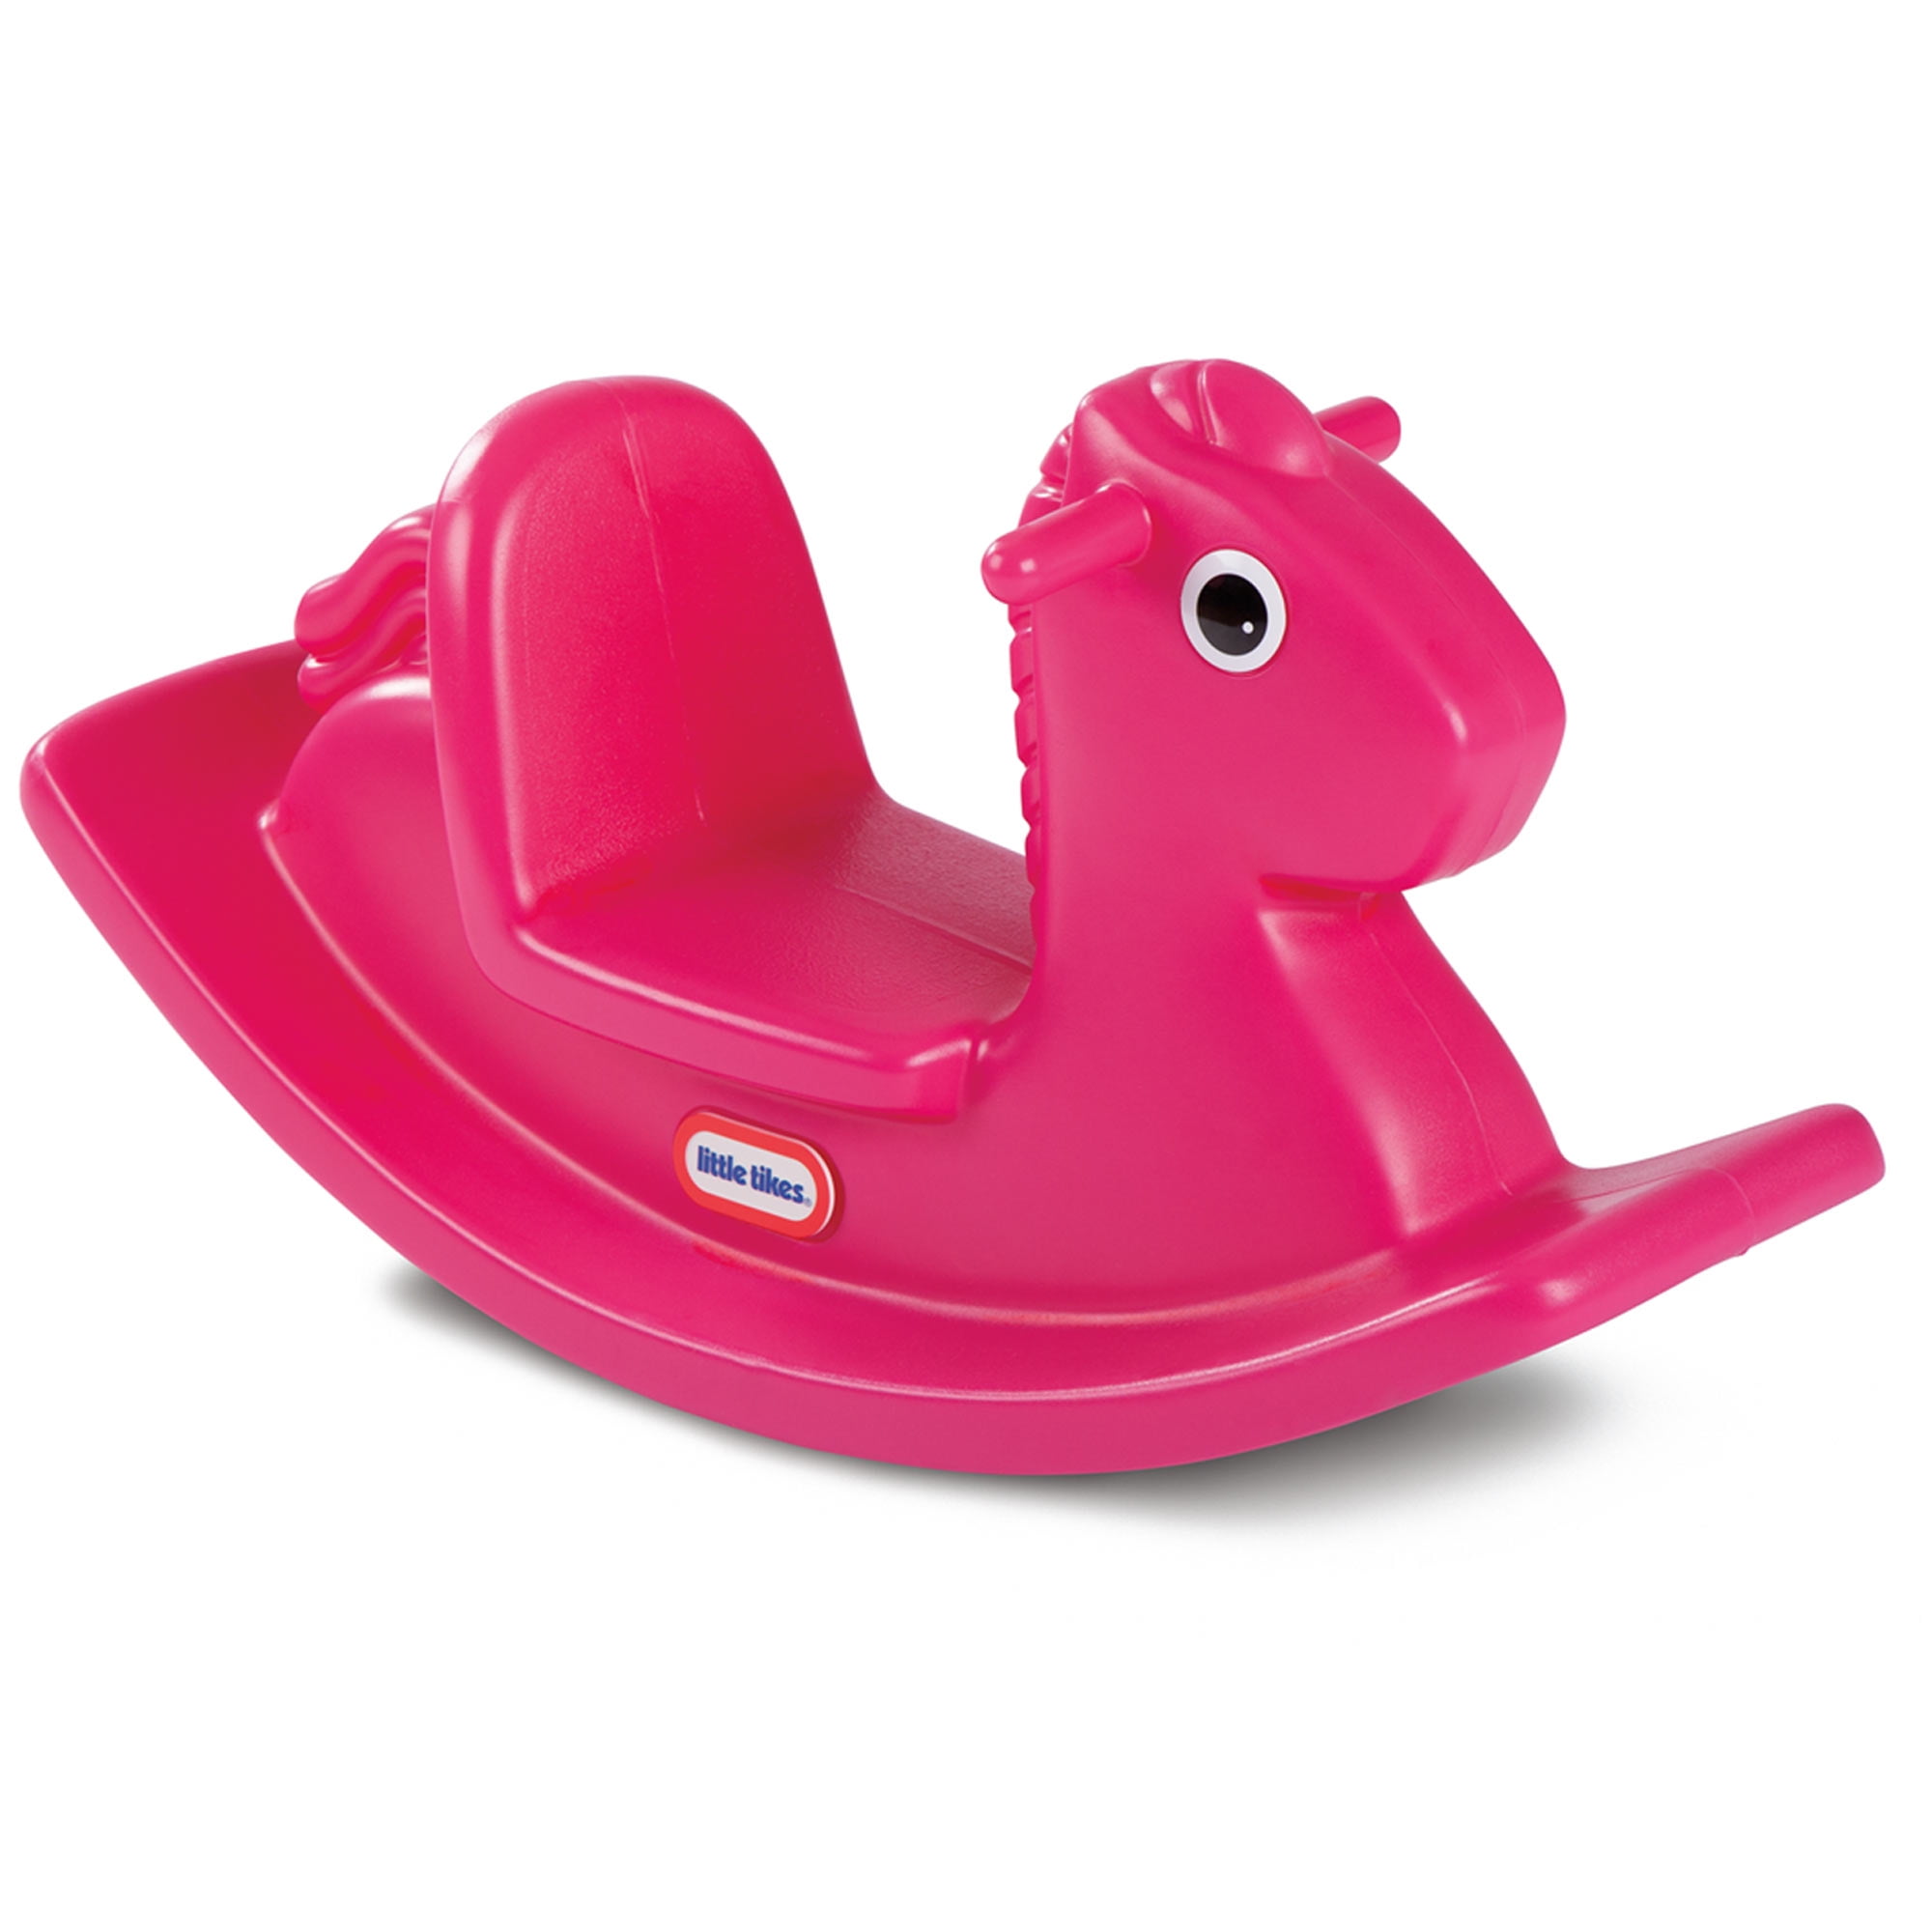 cheap rocking horses for toddlers